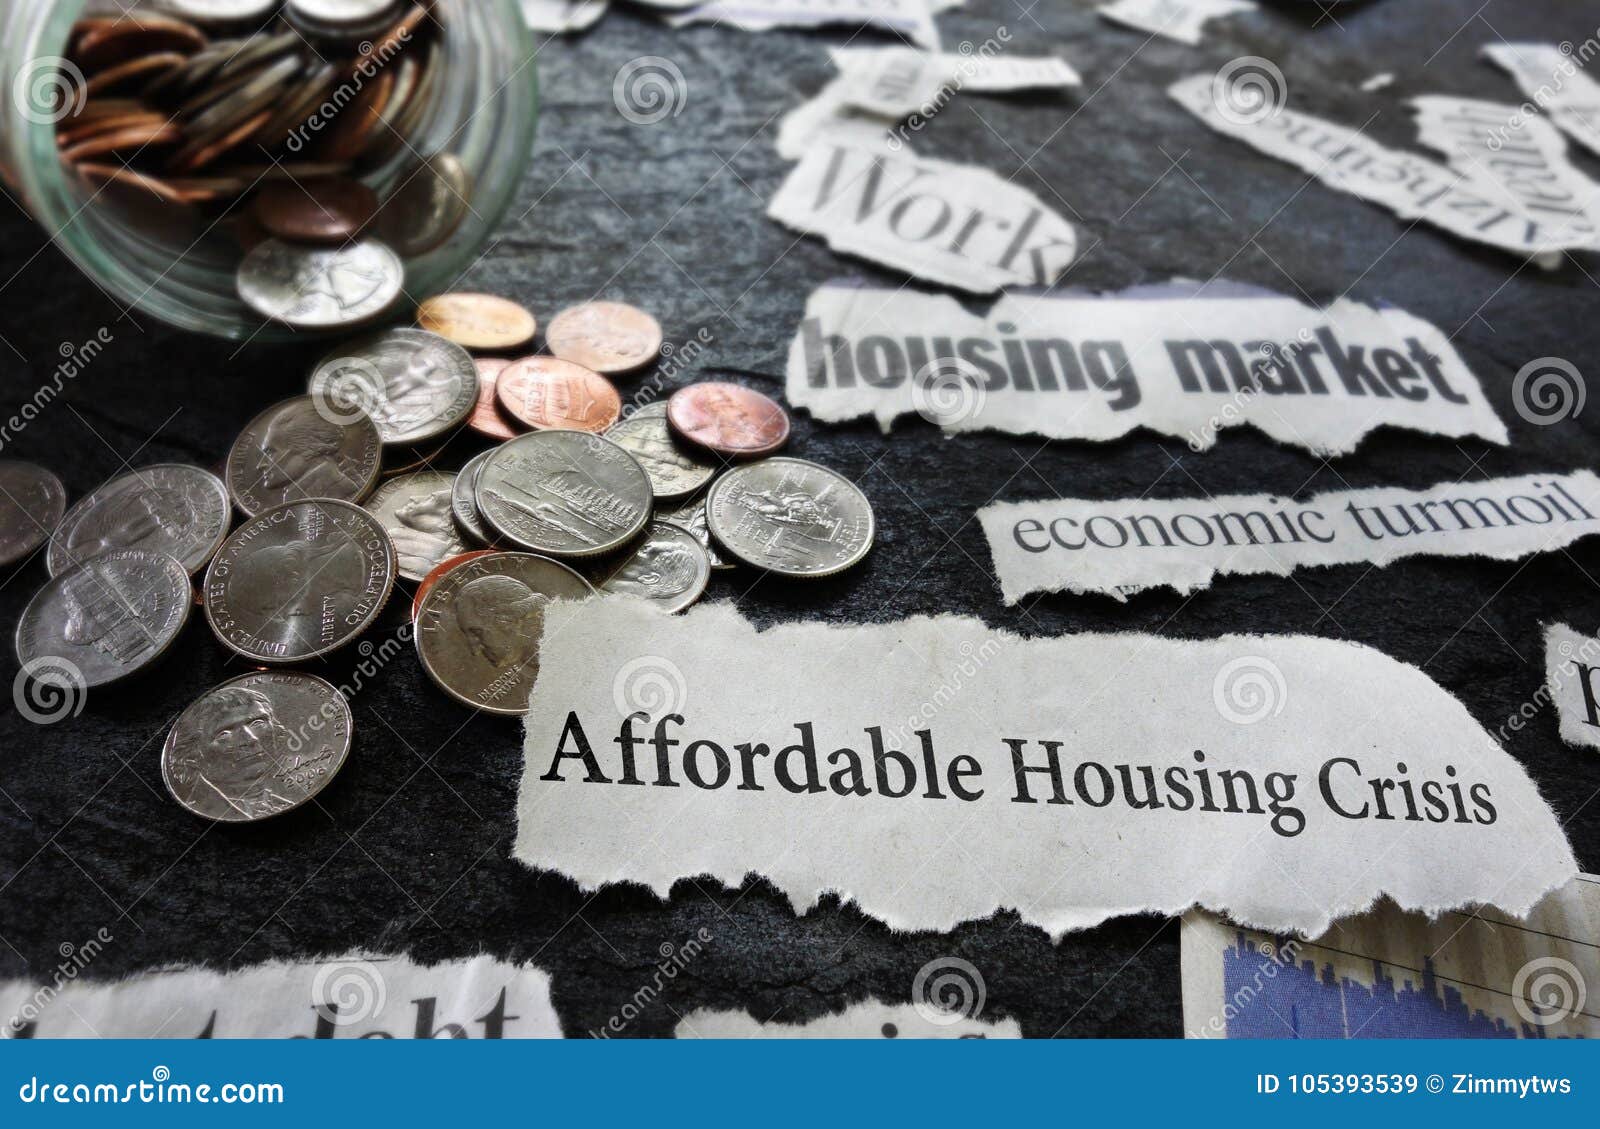 affordable housing crisis news